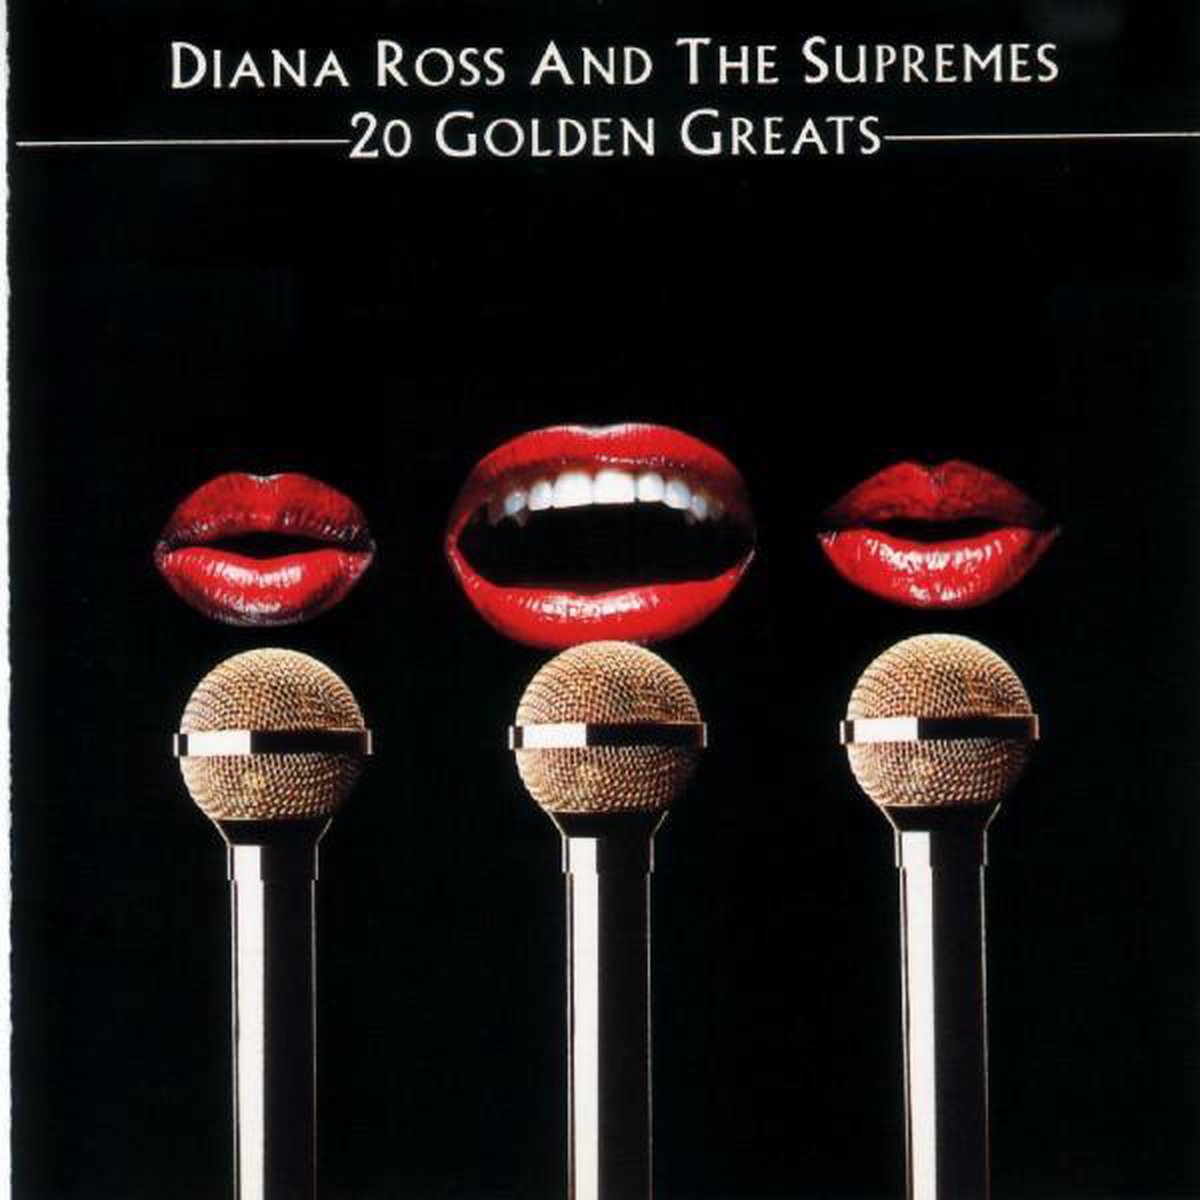 Diana Ross And The Supremes 20 Golden Greats - Diana Ross and the Supremes